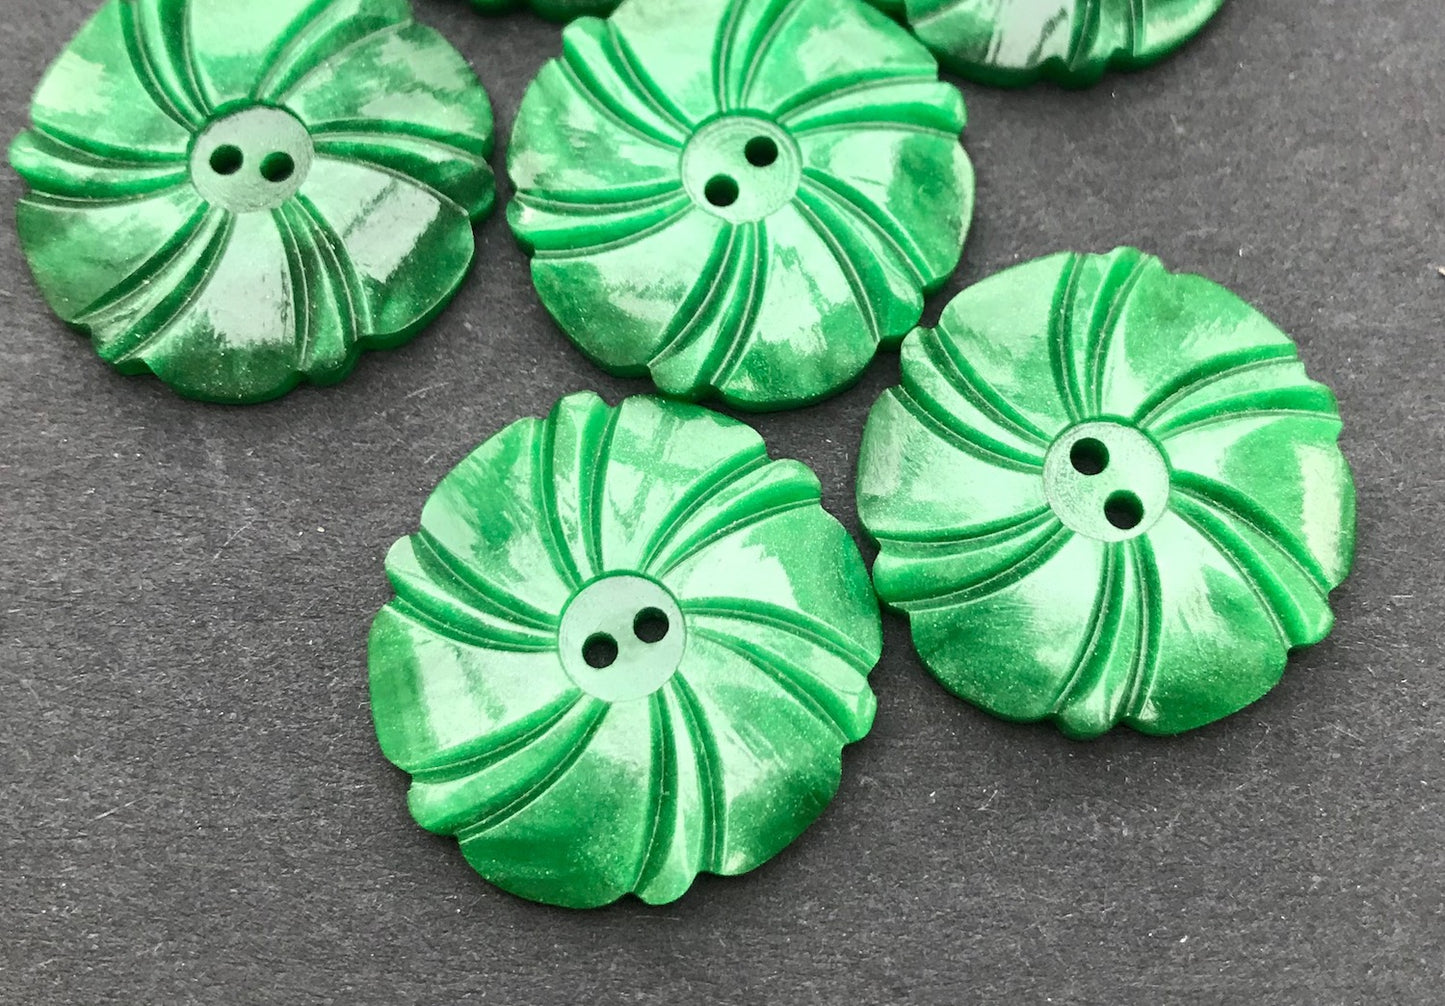 Emerald Green 1930s  Buttons 2.2cm or 1.7cm - Lots of 6 or Sheets of 24